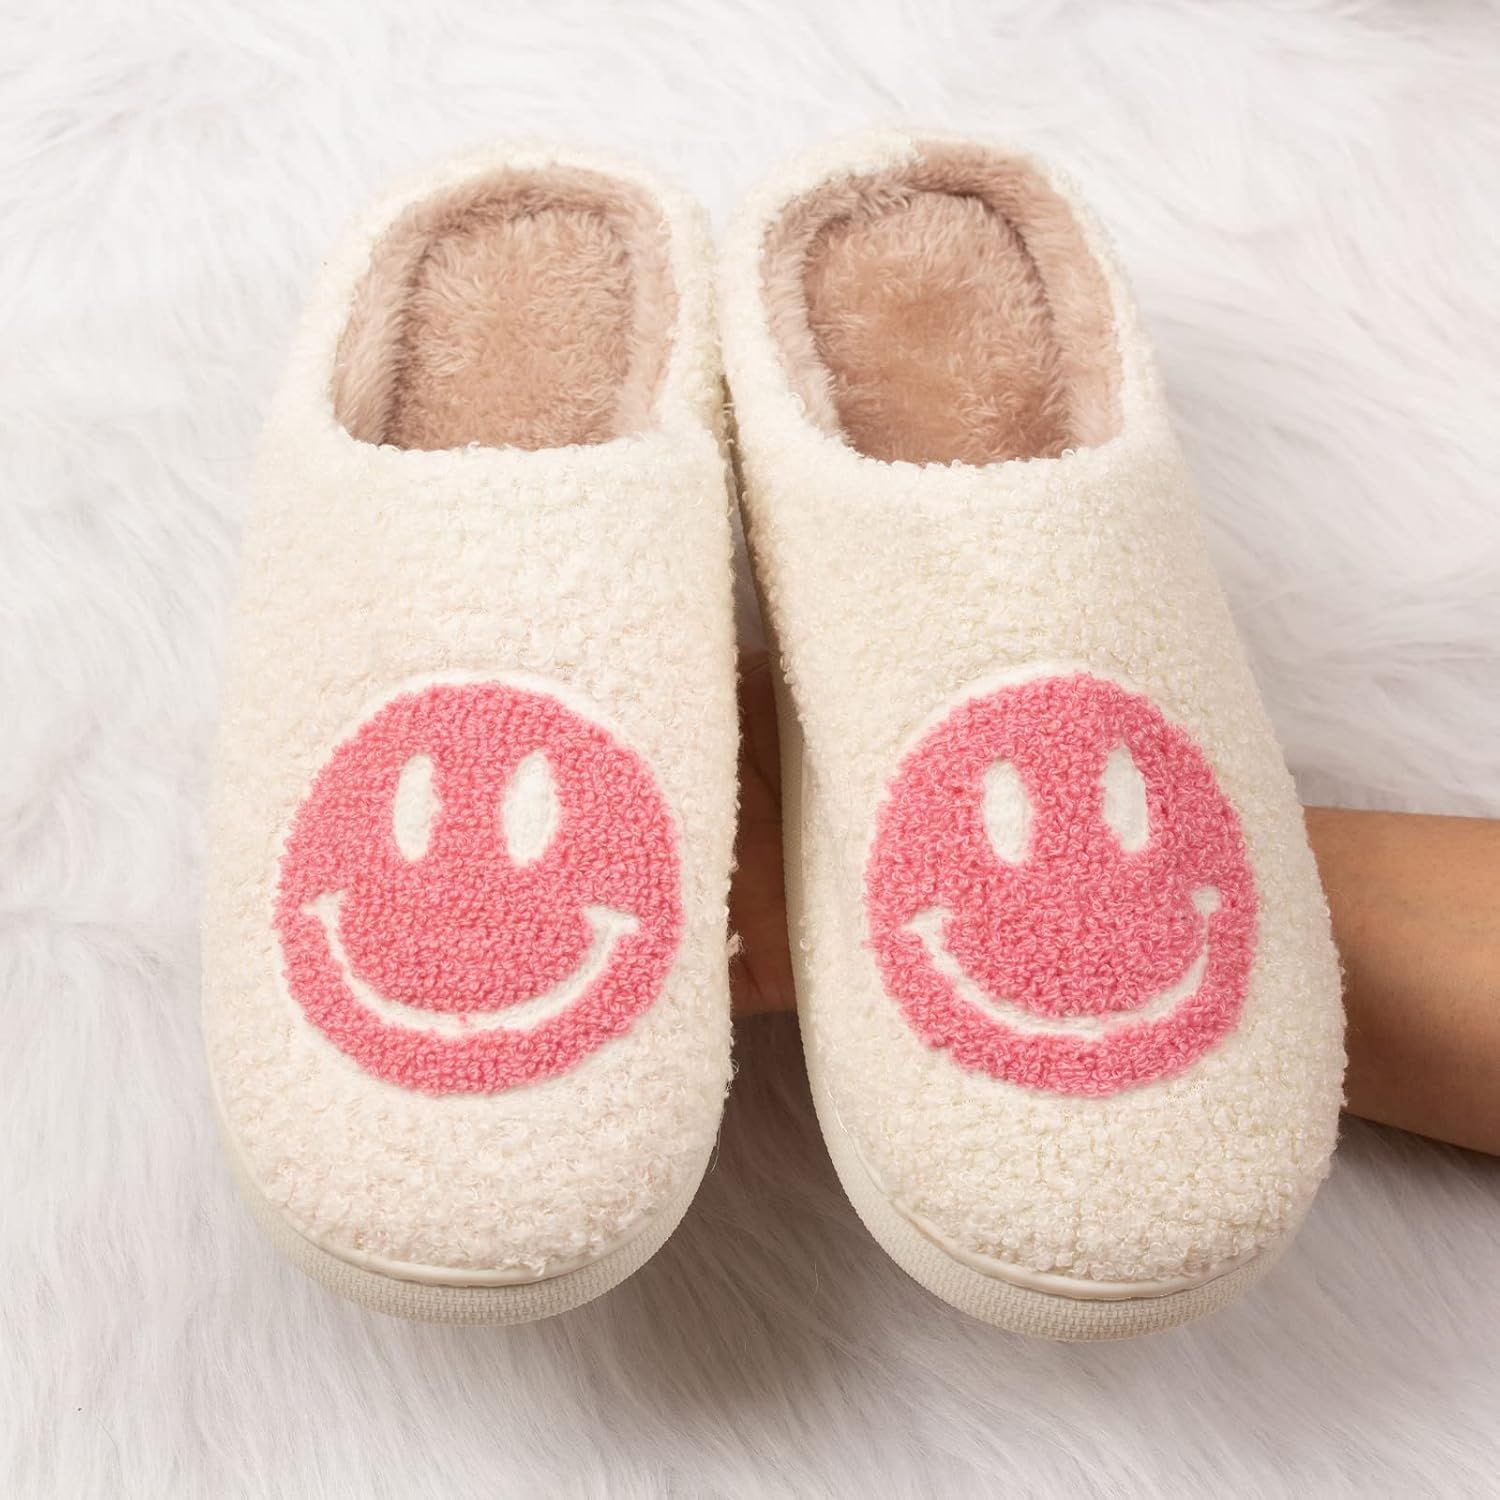 Smiley Face Slippers Retro Cozy Comfy Plush Warm Slip-on Slippers Winter Soft Fuzzy Indoor House ... | Amazon (US)